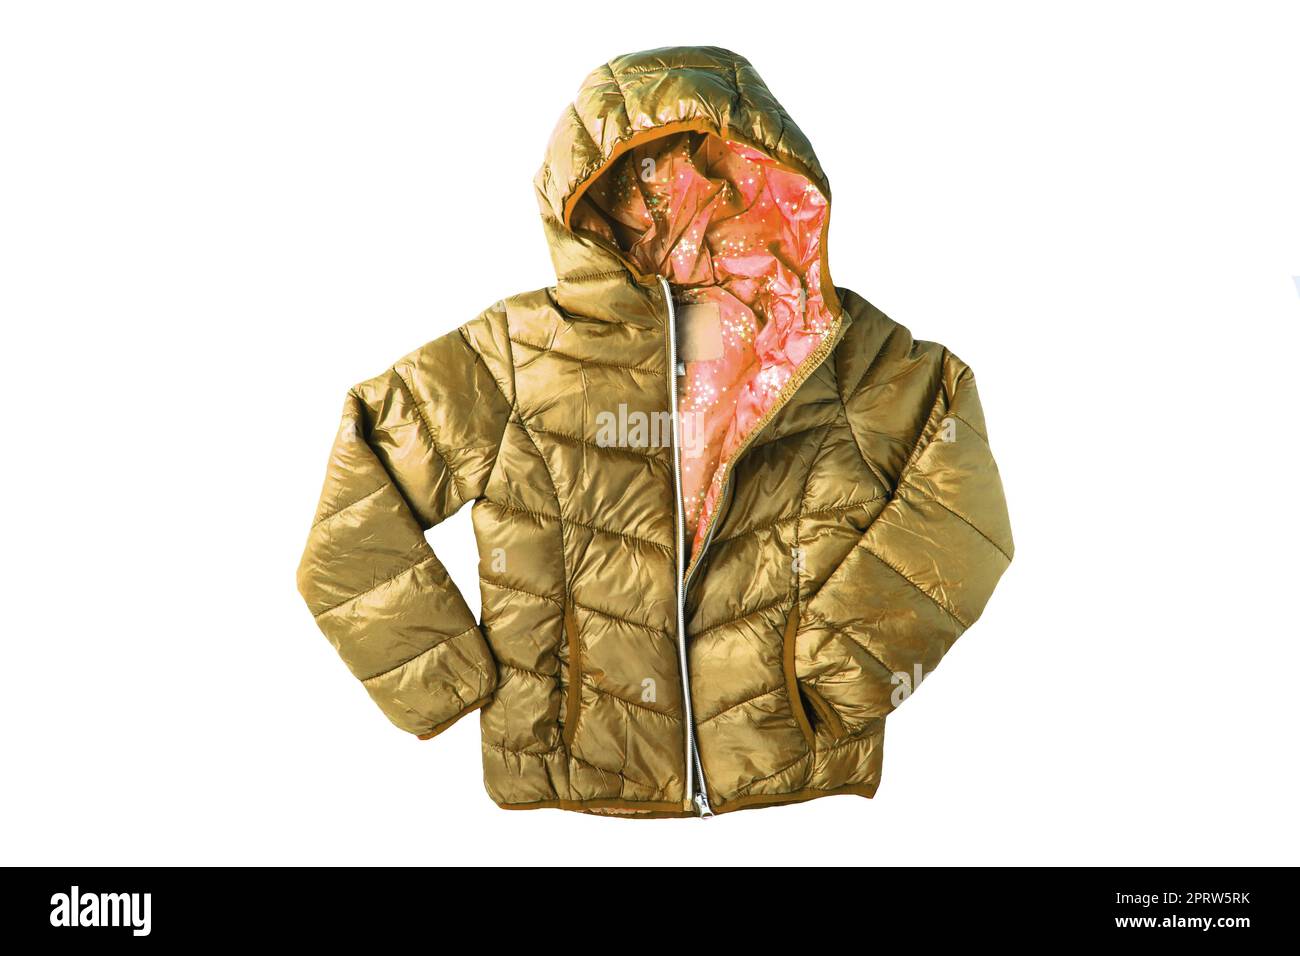 Down jacket for children. Stylish golden cosy warm winter down jacket for kids isolated on a white background. Autumn and winter fashion. Stock Photo